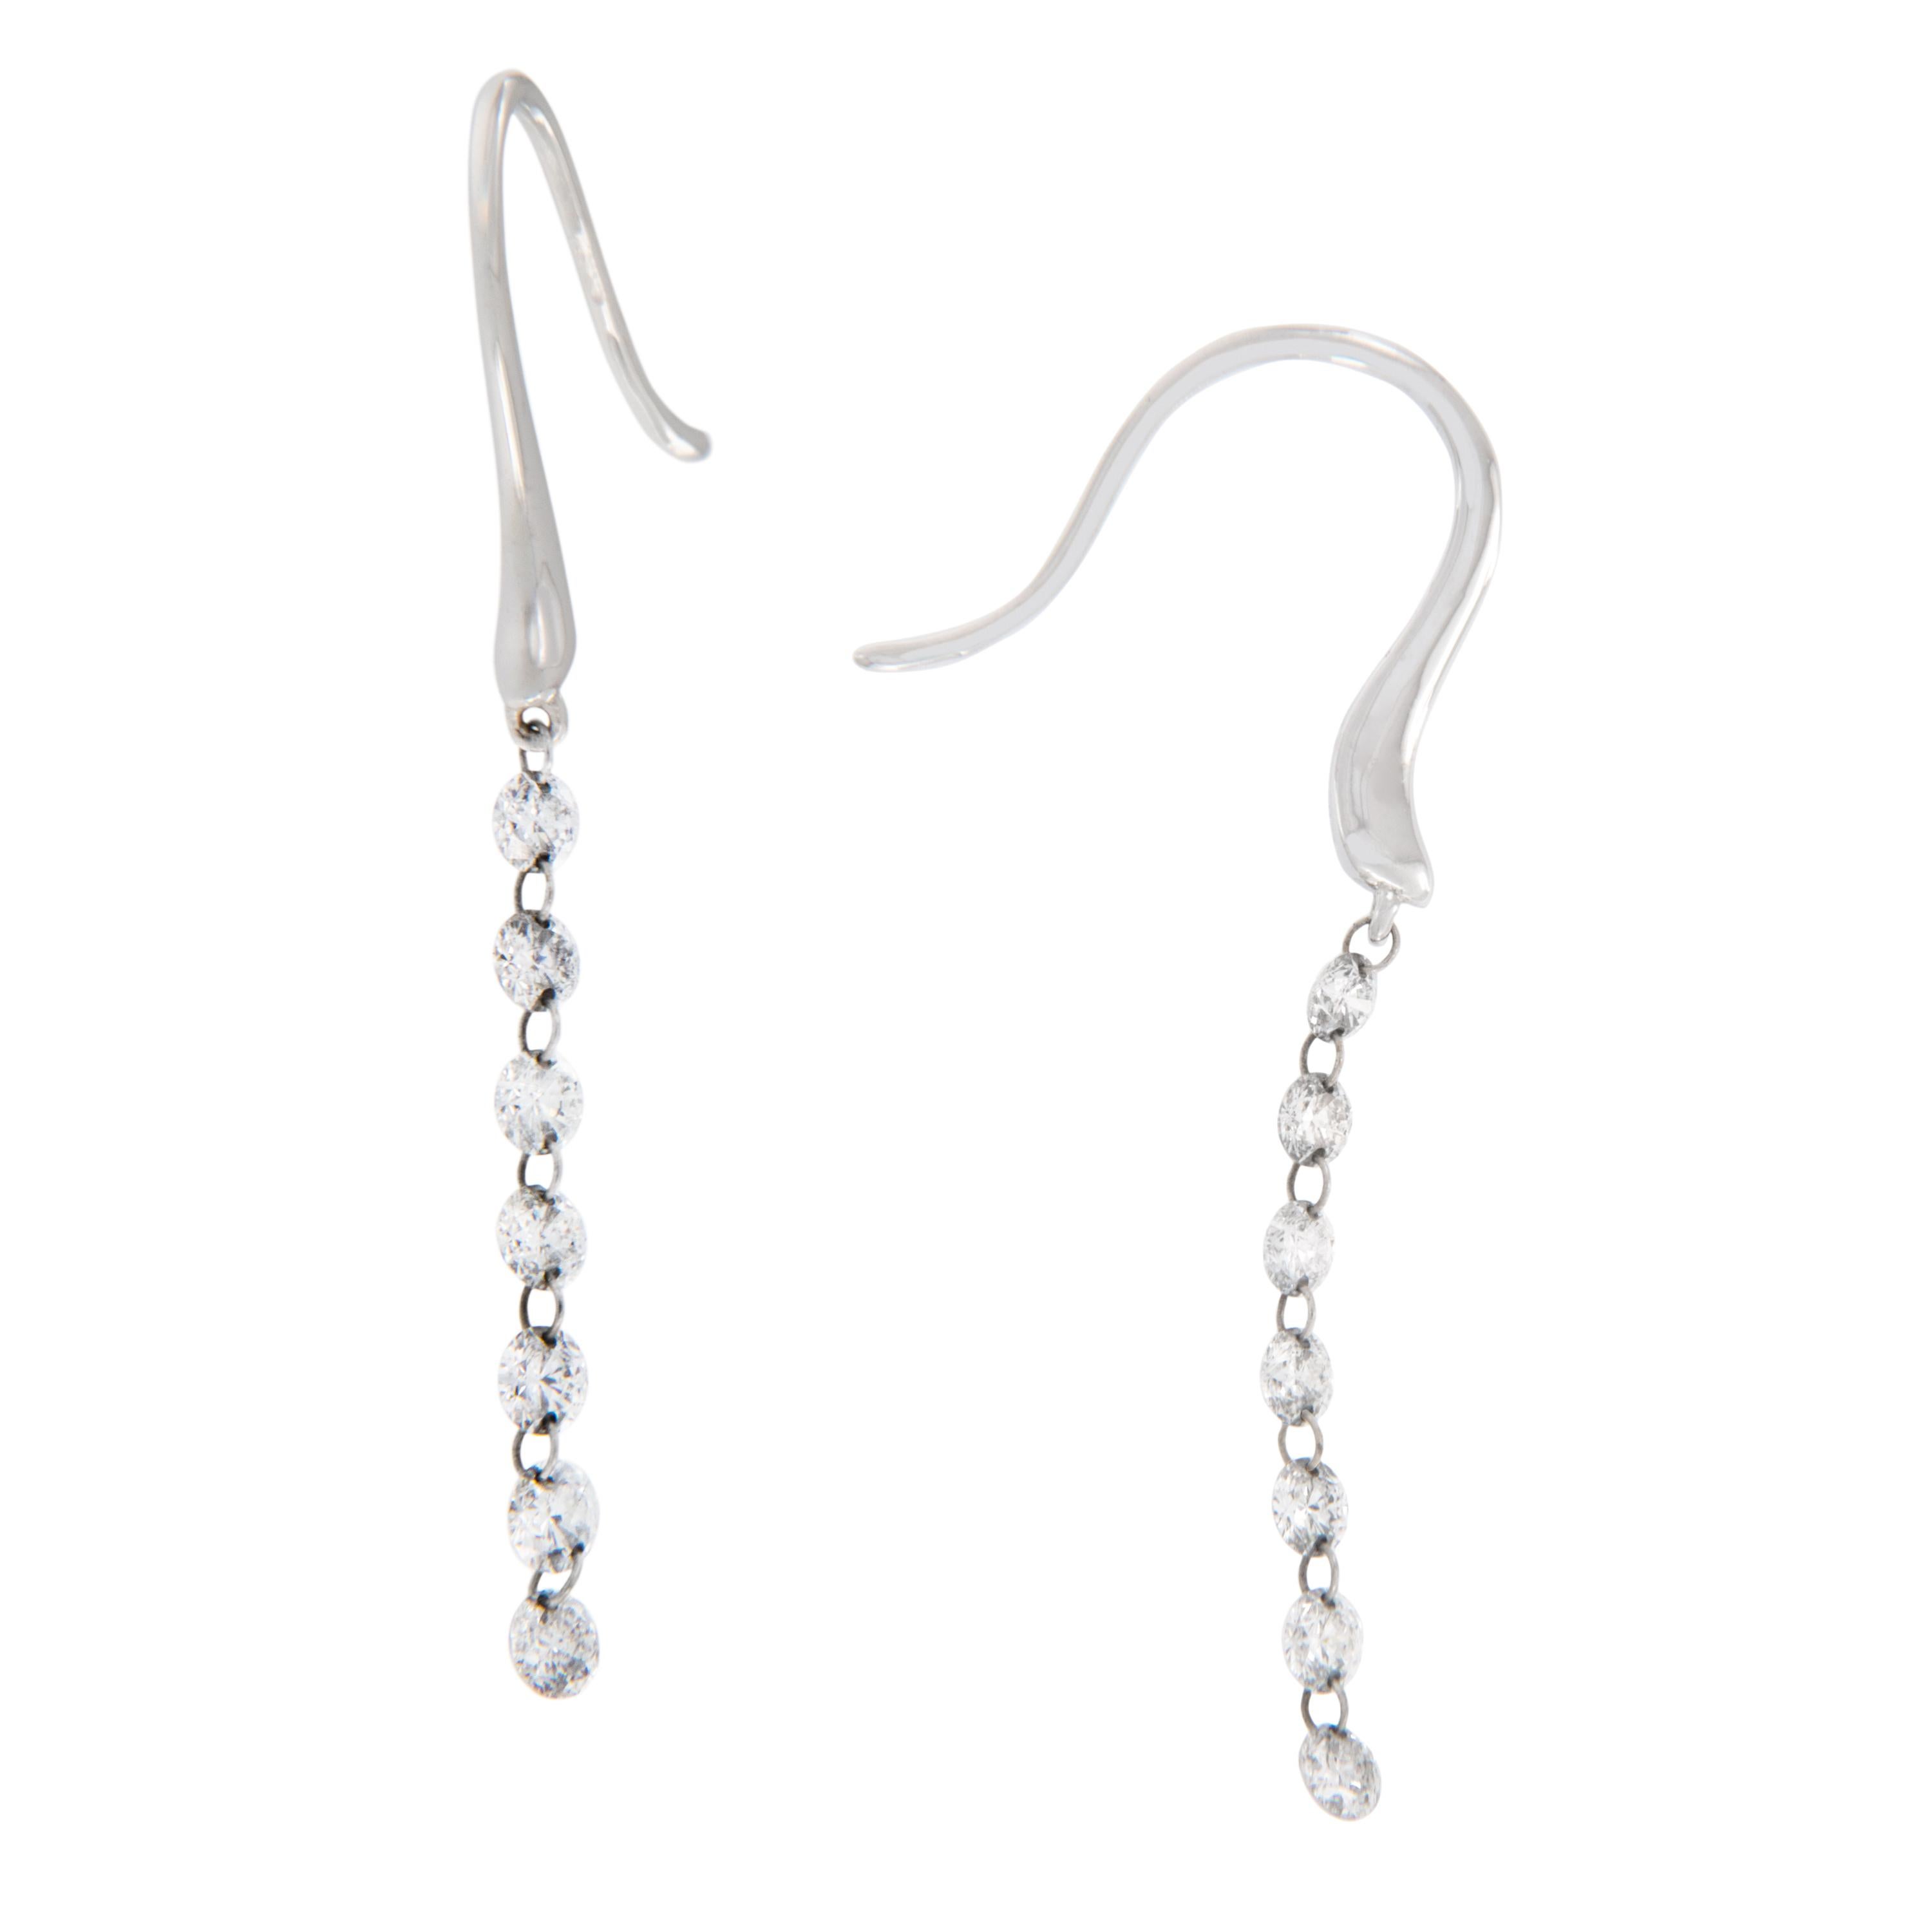 So fun and contemporary! These 18 karat white gold dangle diamond earrings contain 14 